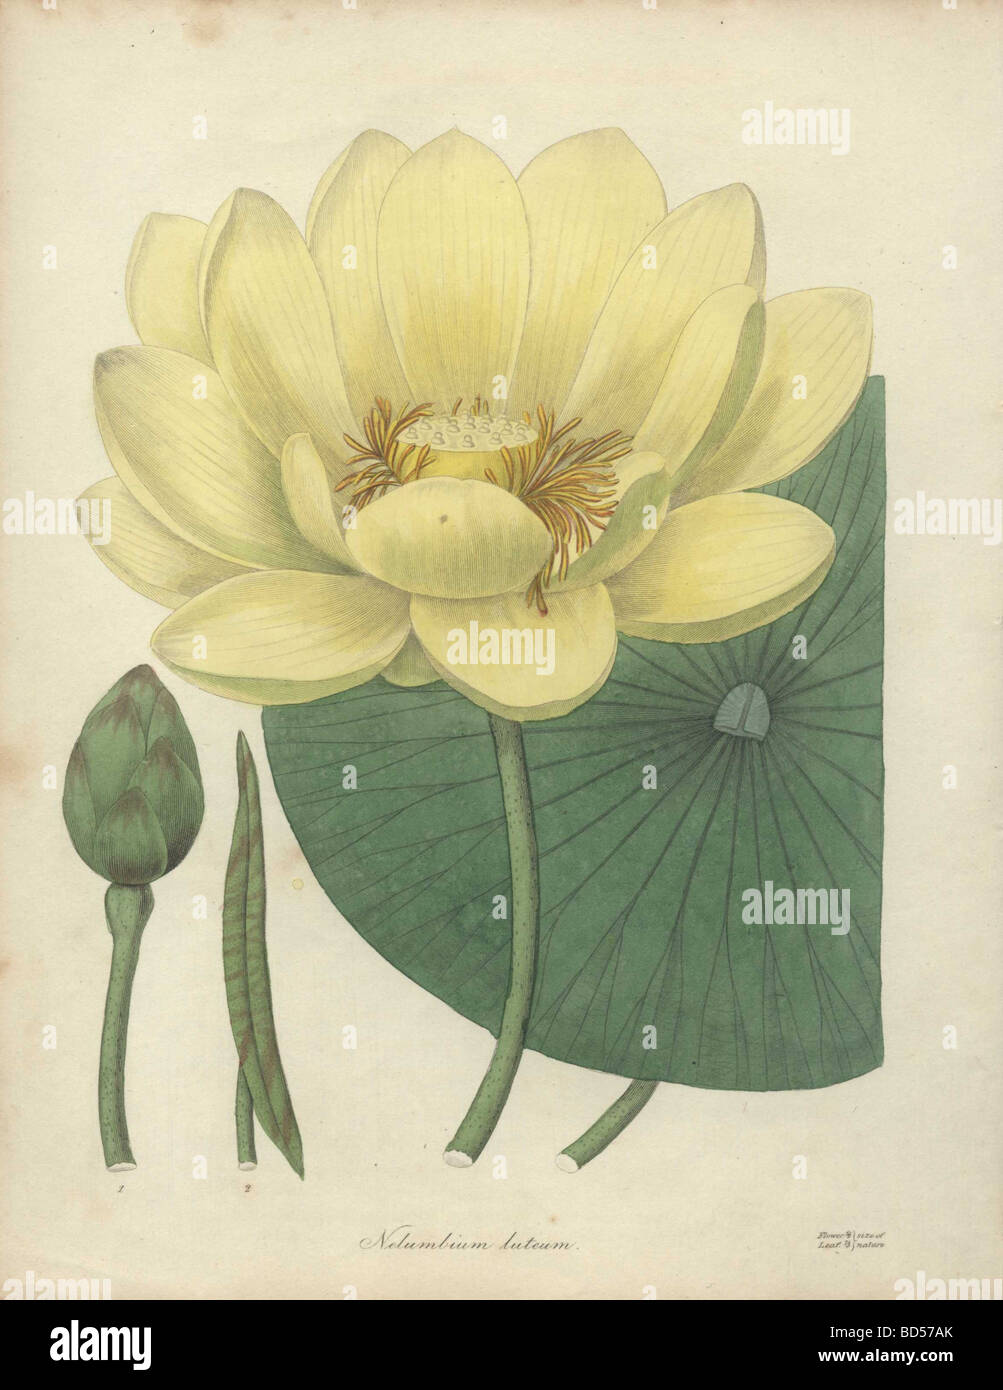 Fine copperplate engraving of a yellow water lily (Nelumbium luteum) flower and round leaf from 'The Botanist' (1836). Stock Photo